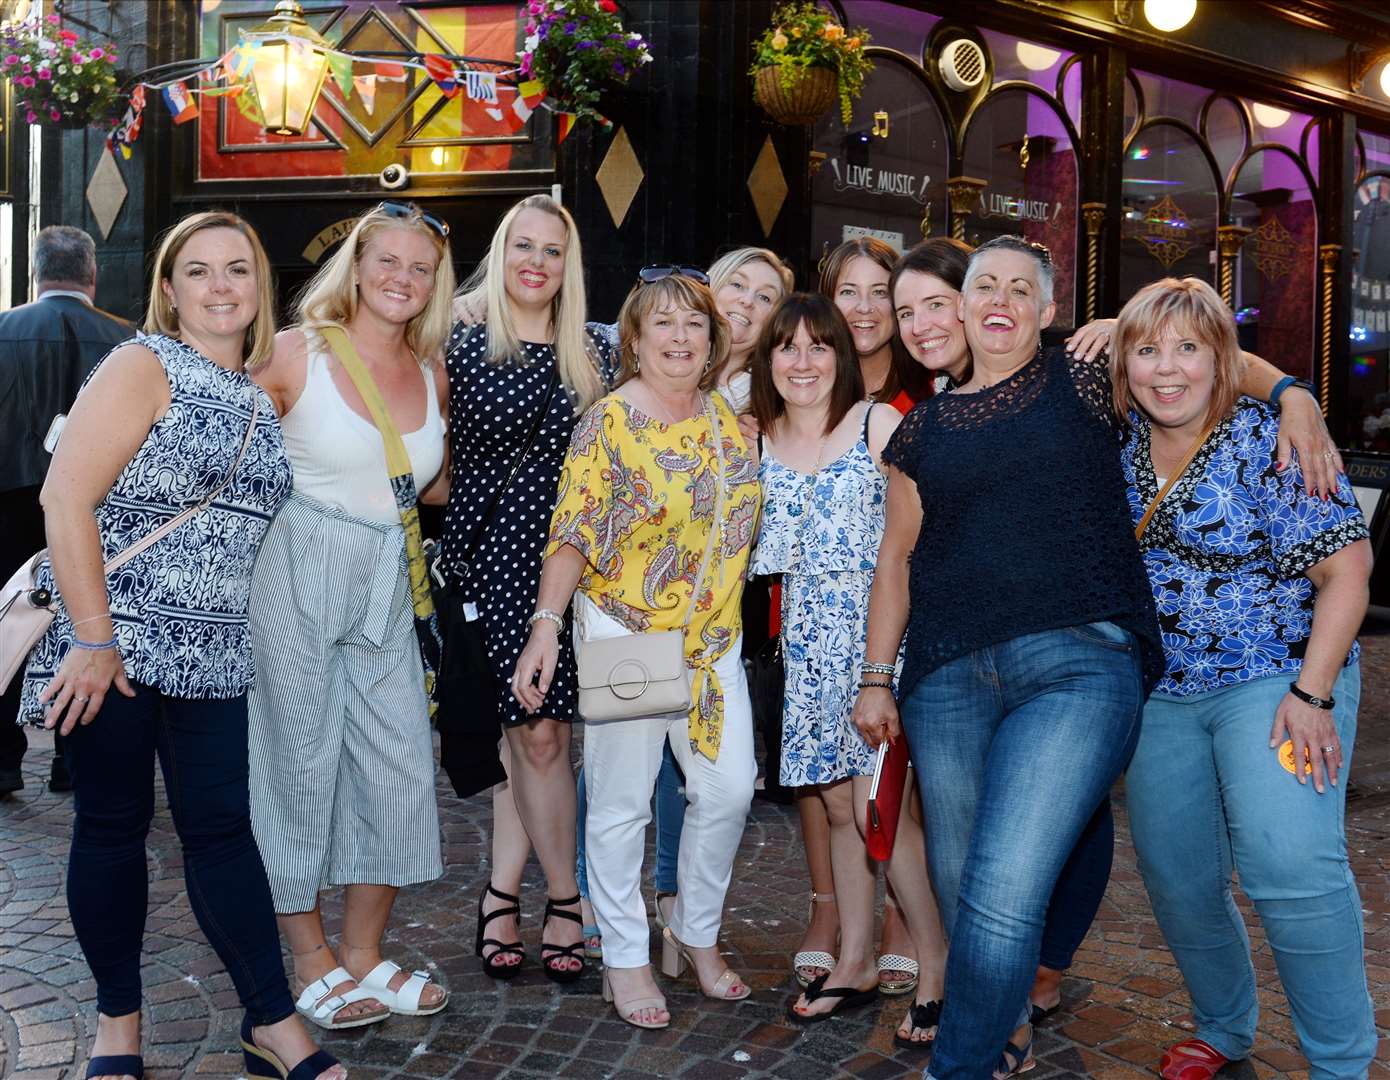 The staff of Ward 5C at Raigmore enjoy a night out.